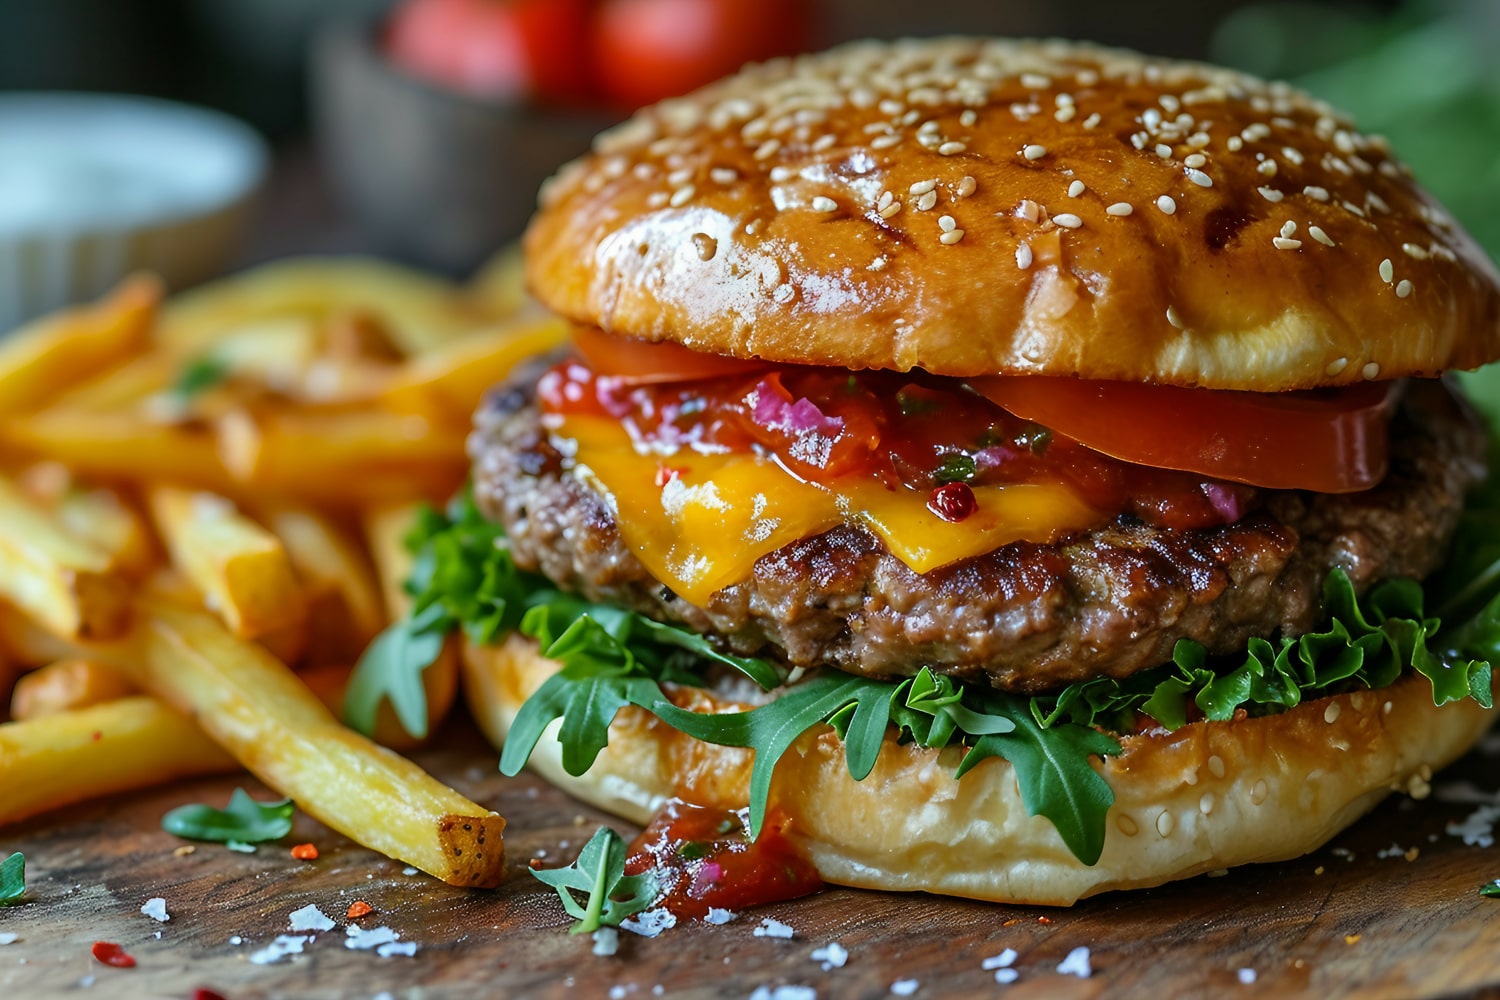 juicy beef burger with greens, cheese, tomato, ketchup with a side of fries